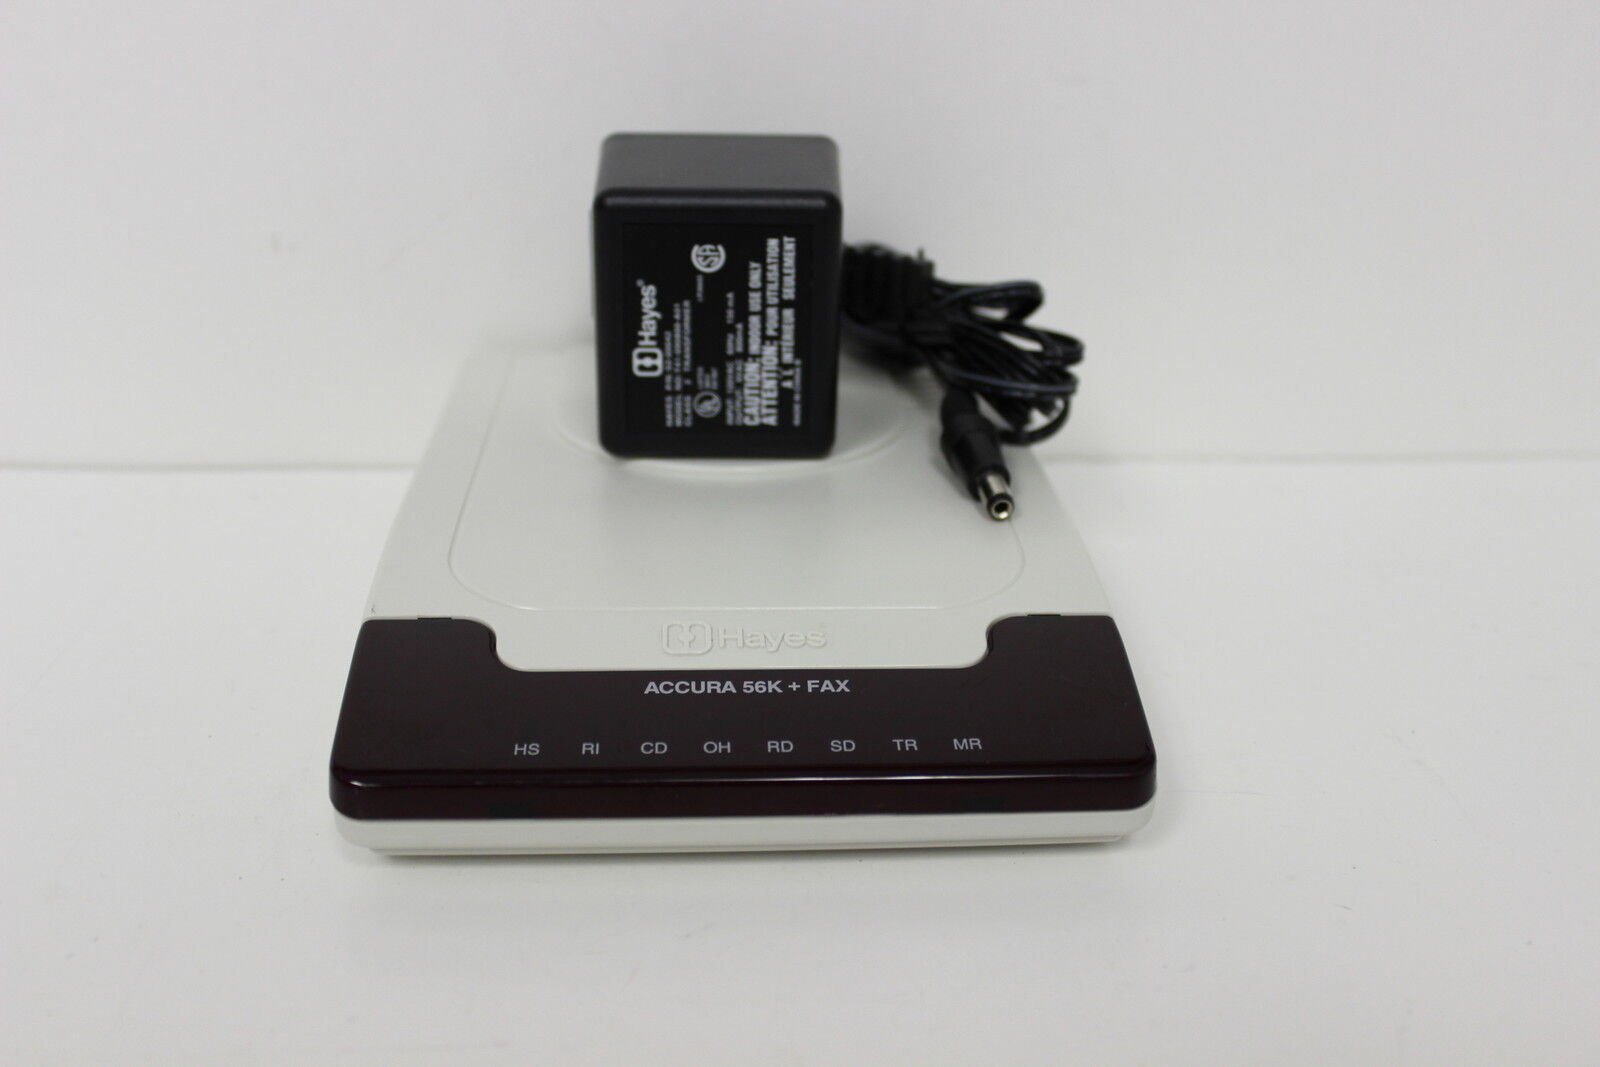 HAYES 5674US ACCURA 56K EXTERNAL FAX MODEM ACCURA 56K + FAX WITH